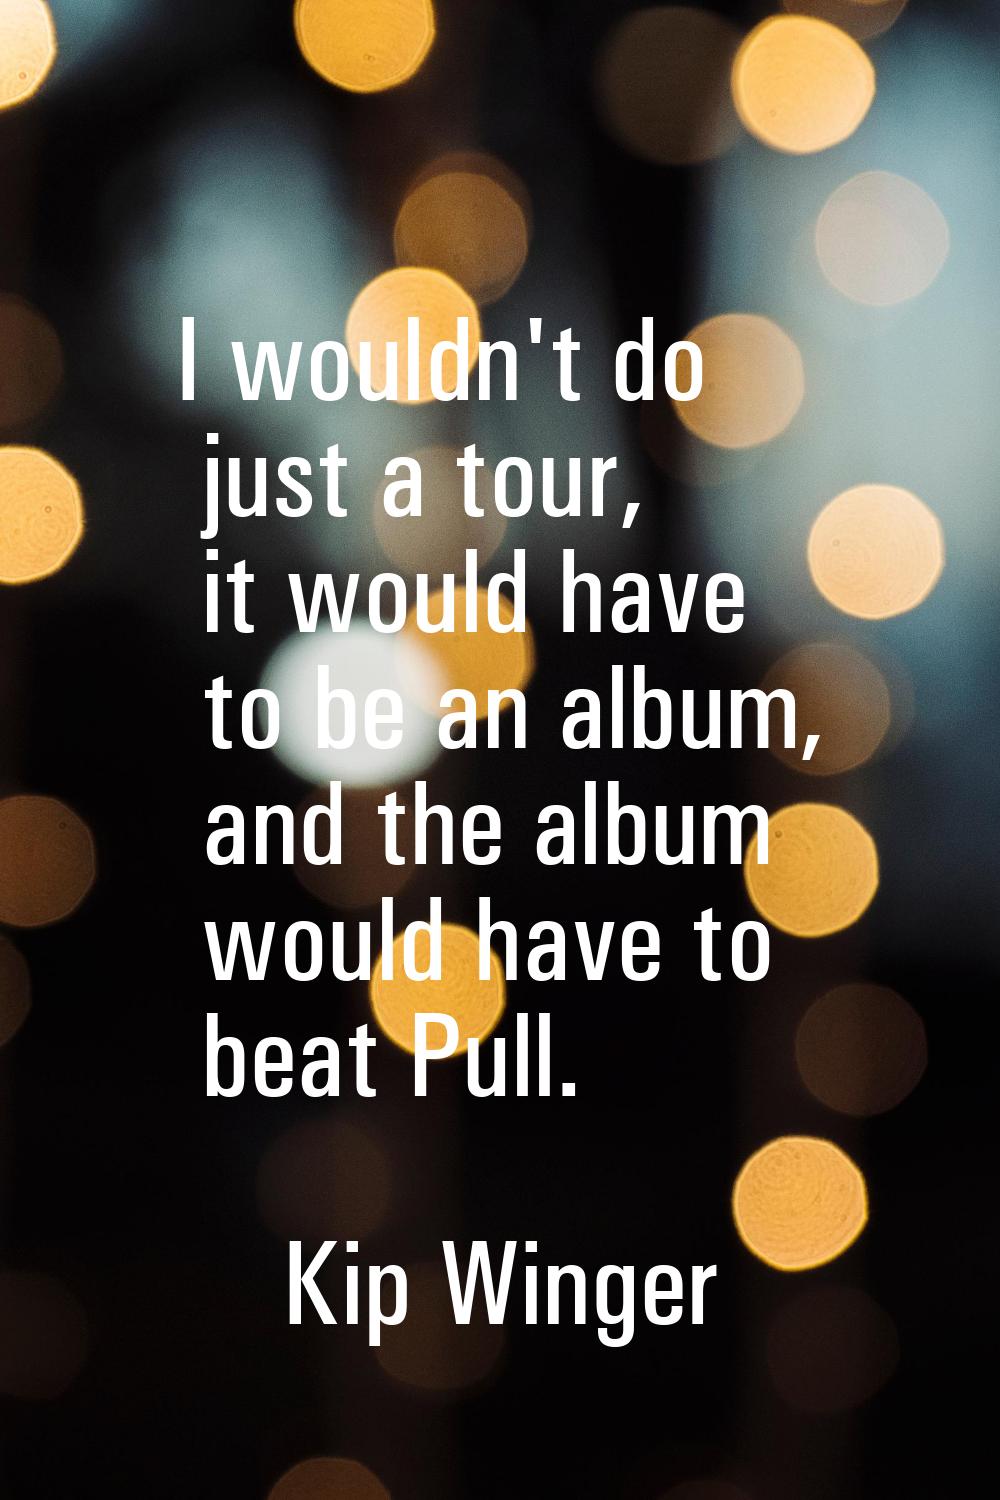 I wouldn't do just a tour, it would have to be an album, and the album would have to beat Pull.